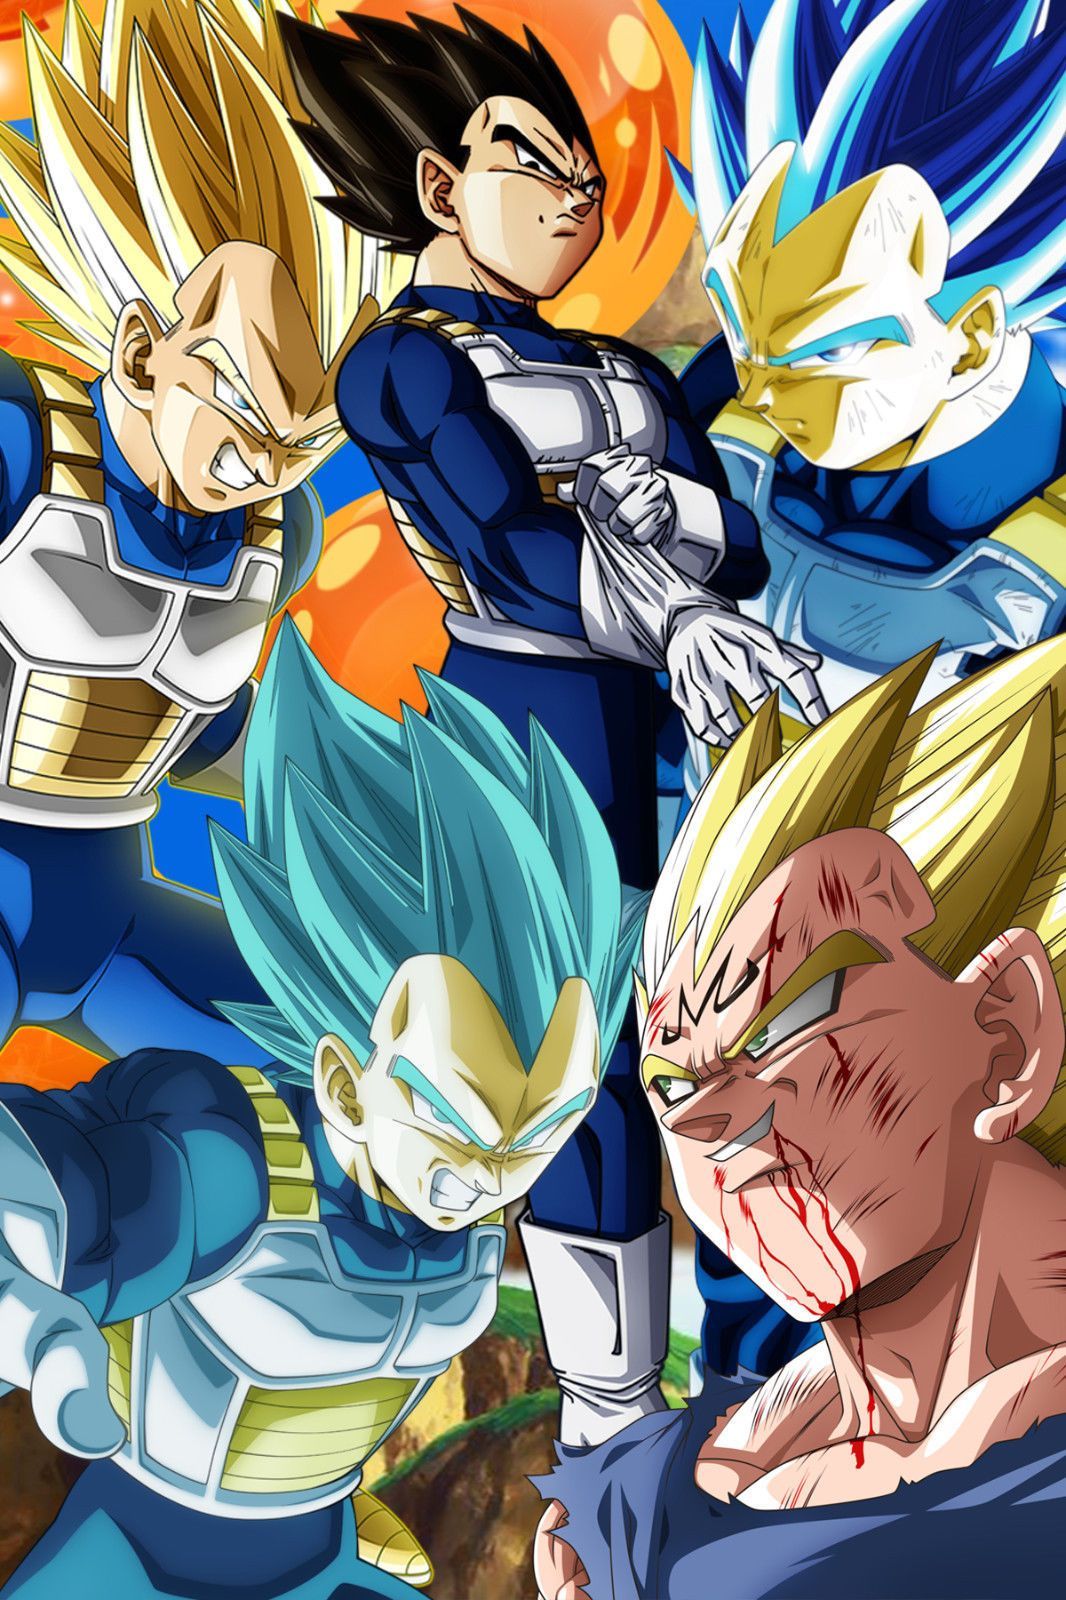 Dragon Ball Z Super Poster Vegeta Five Different Forms 12inx18in Free Shipping. Anime Dragon Ball Super, Anime Dragon Ball, Dragon Ball Z